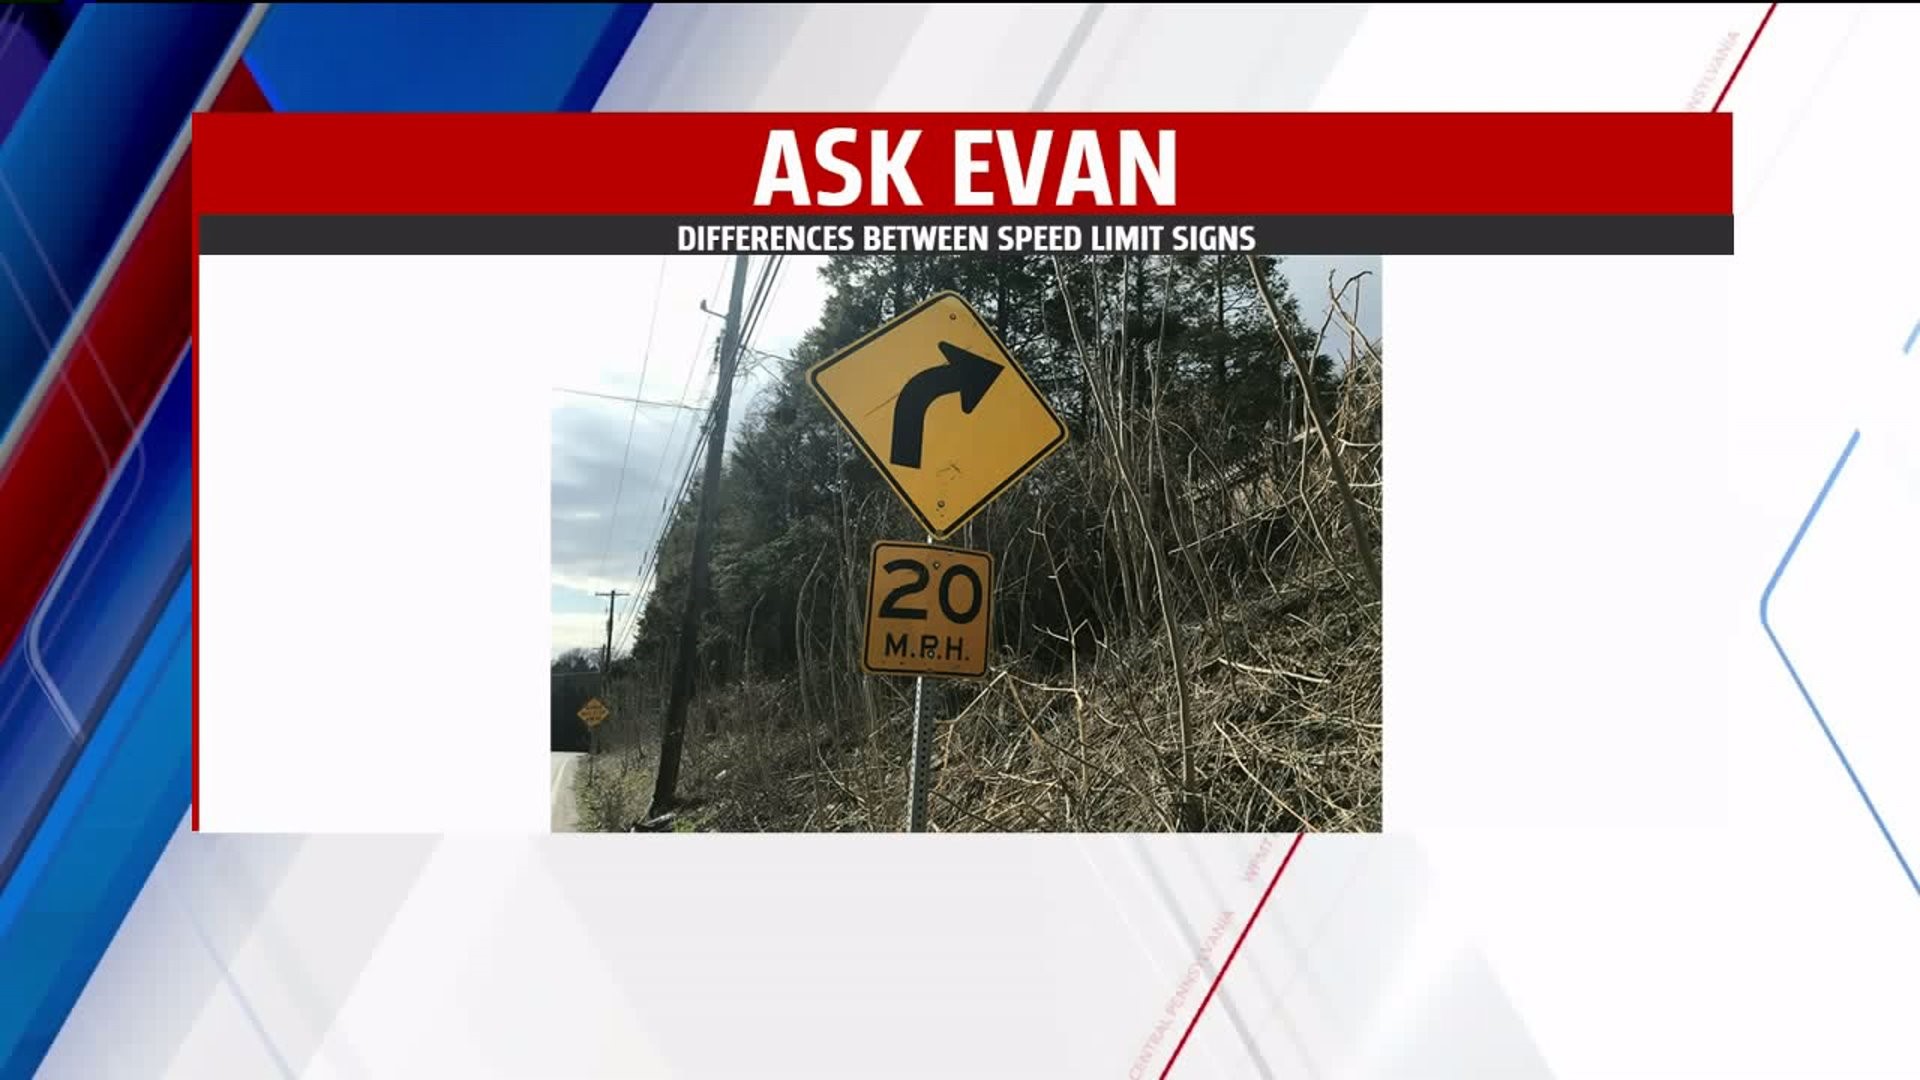 `Ask Evan`: "What are the differences between yellow and white speed limit signs?"